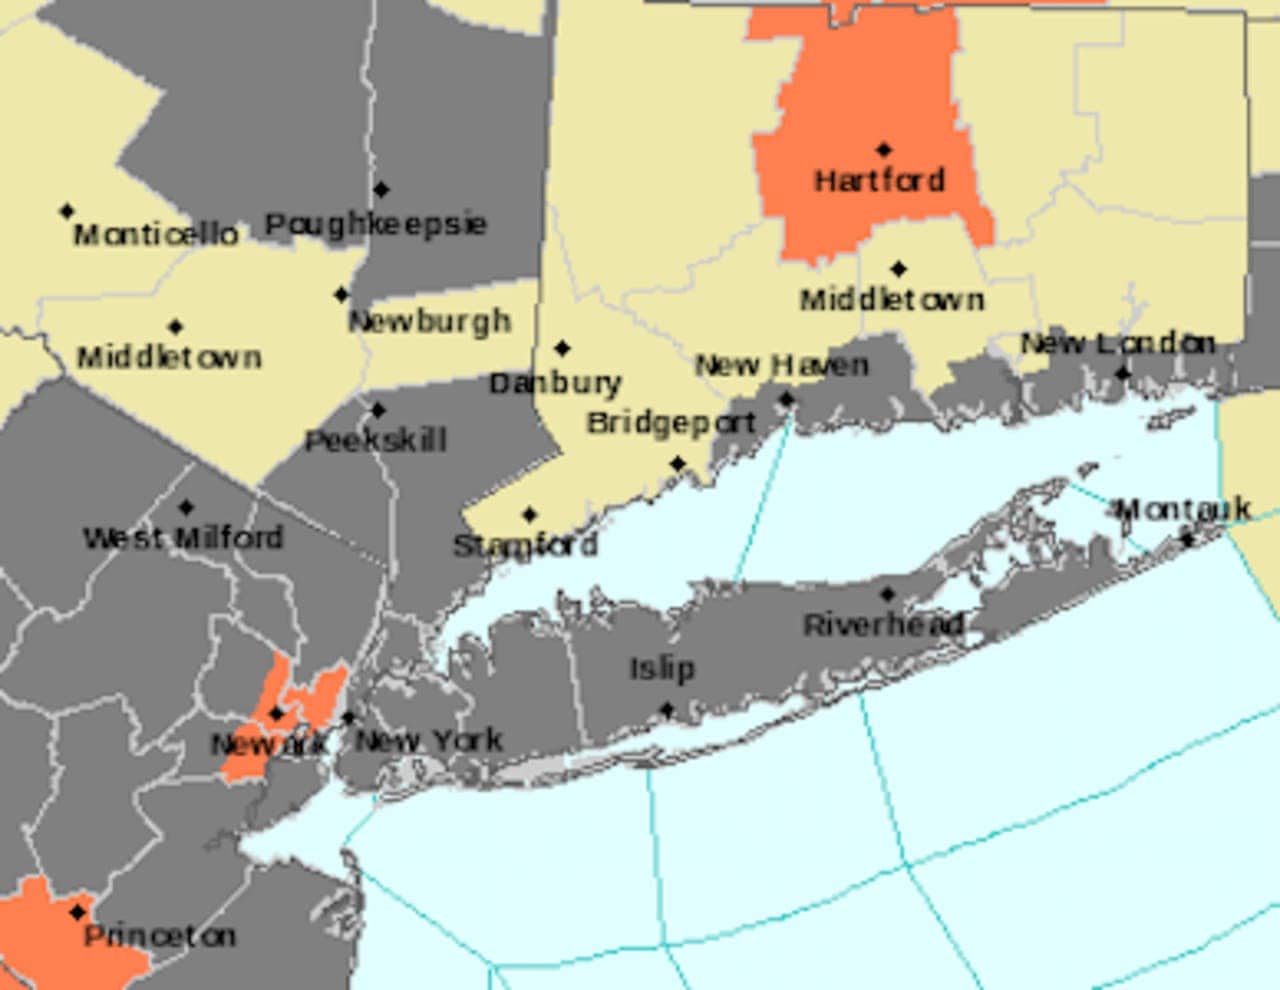 An Air Quality Alert has been issued all of northern New Jersey.